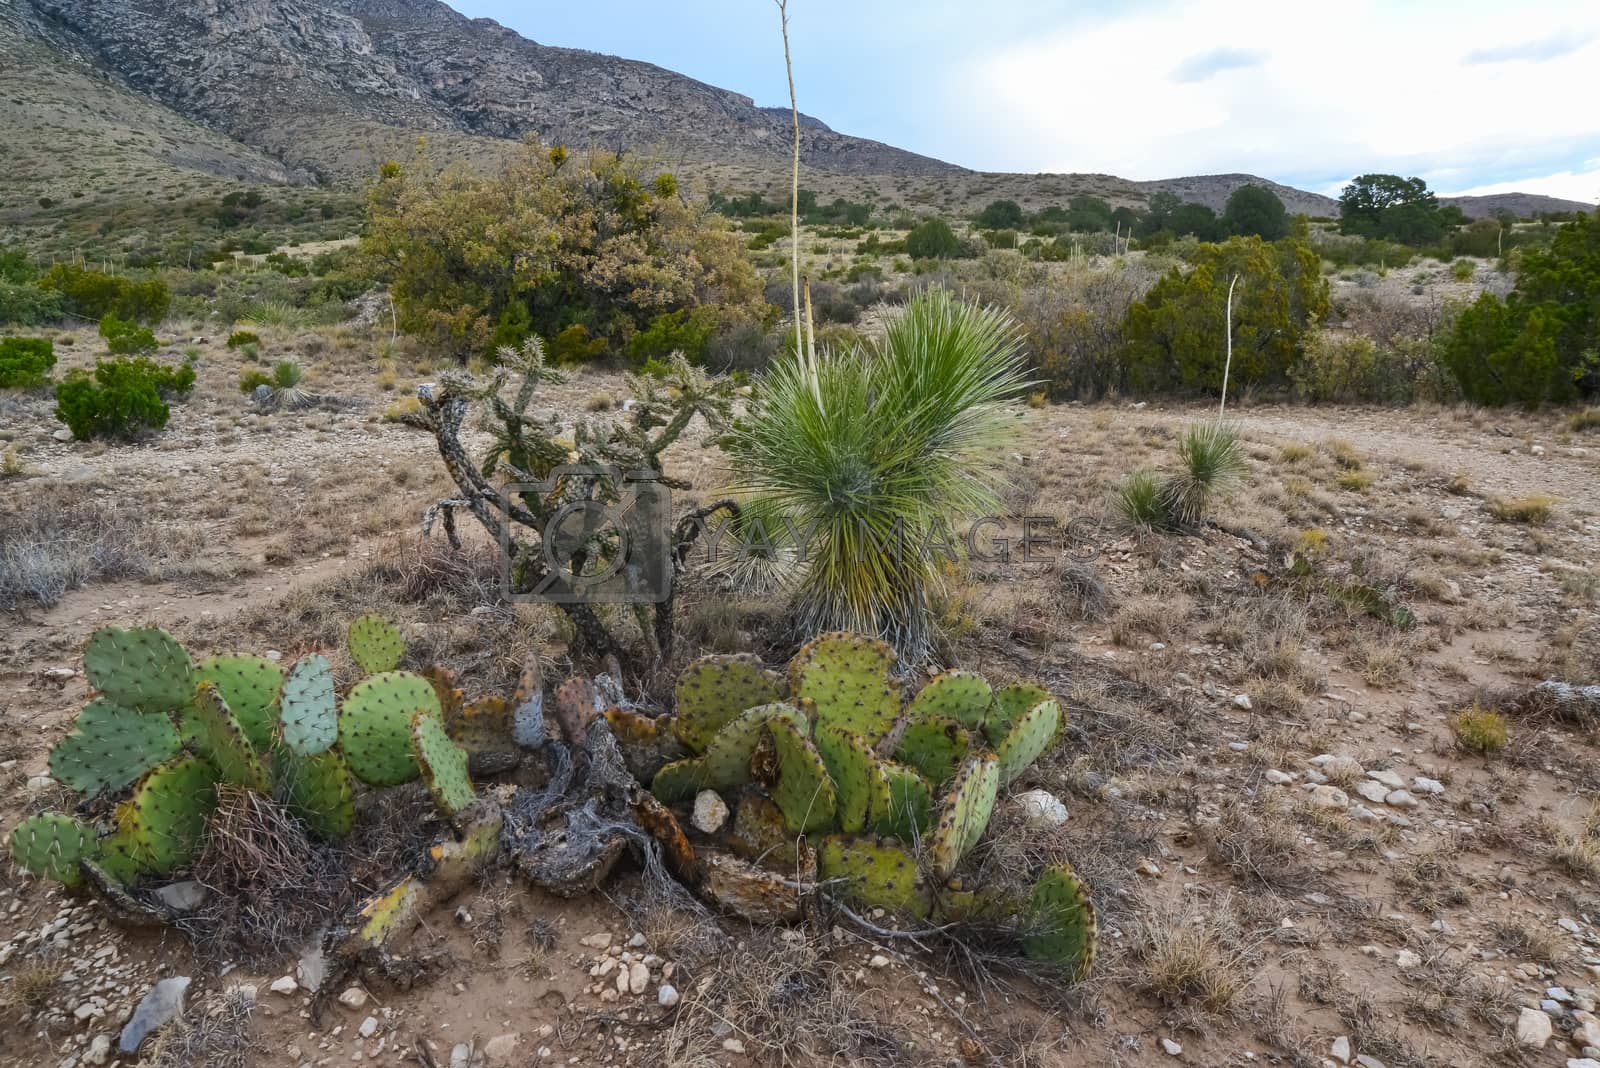 Royalty free image of Opuntia cacti and other desert plants in the mountains landscape by Hydrobiolog